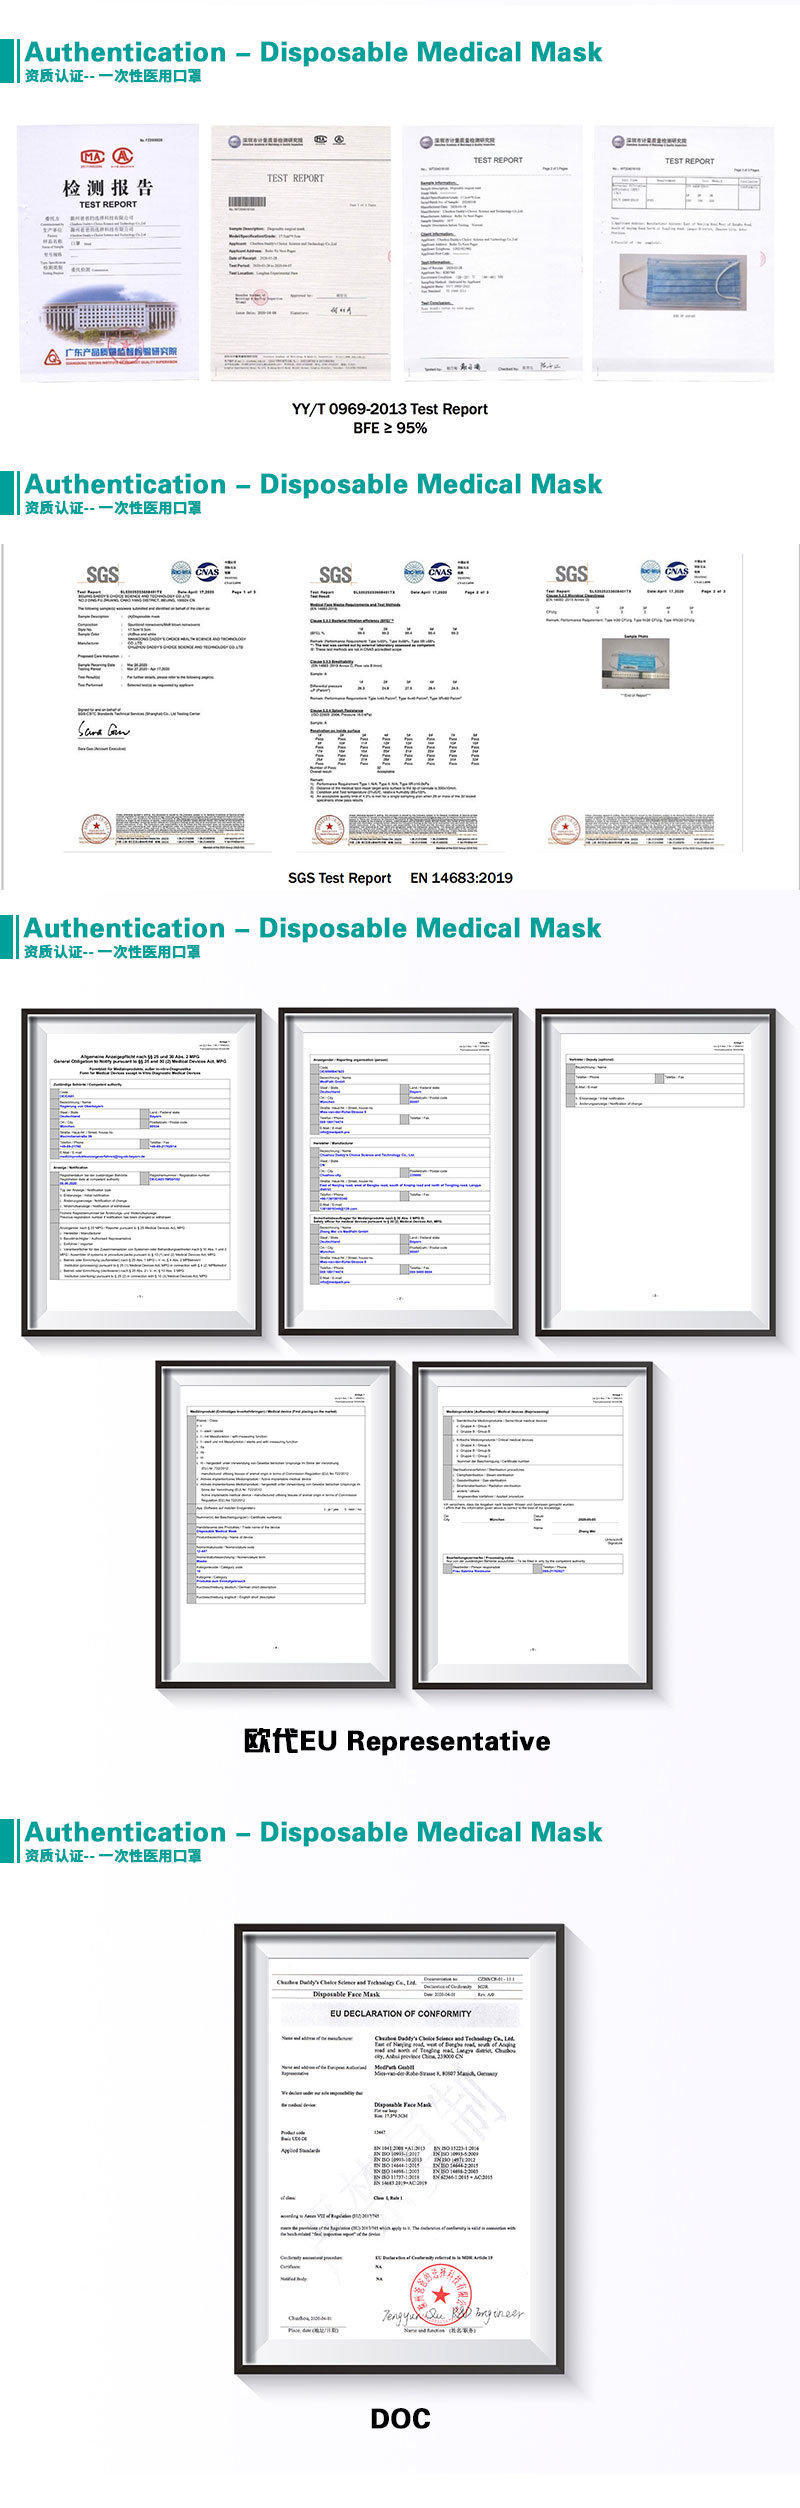 Superior Quality Disposable Non Woven Fabric Surgical Masks for Medical Use